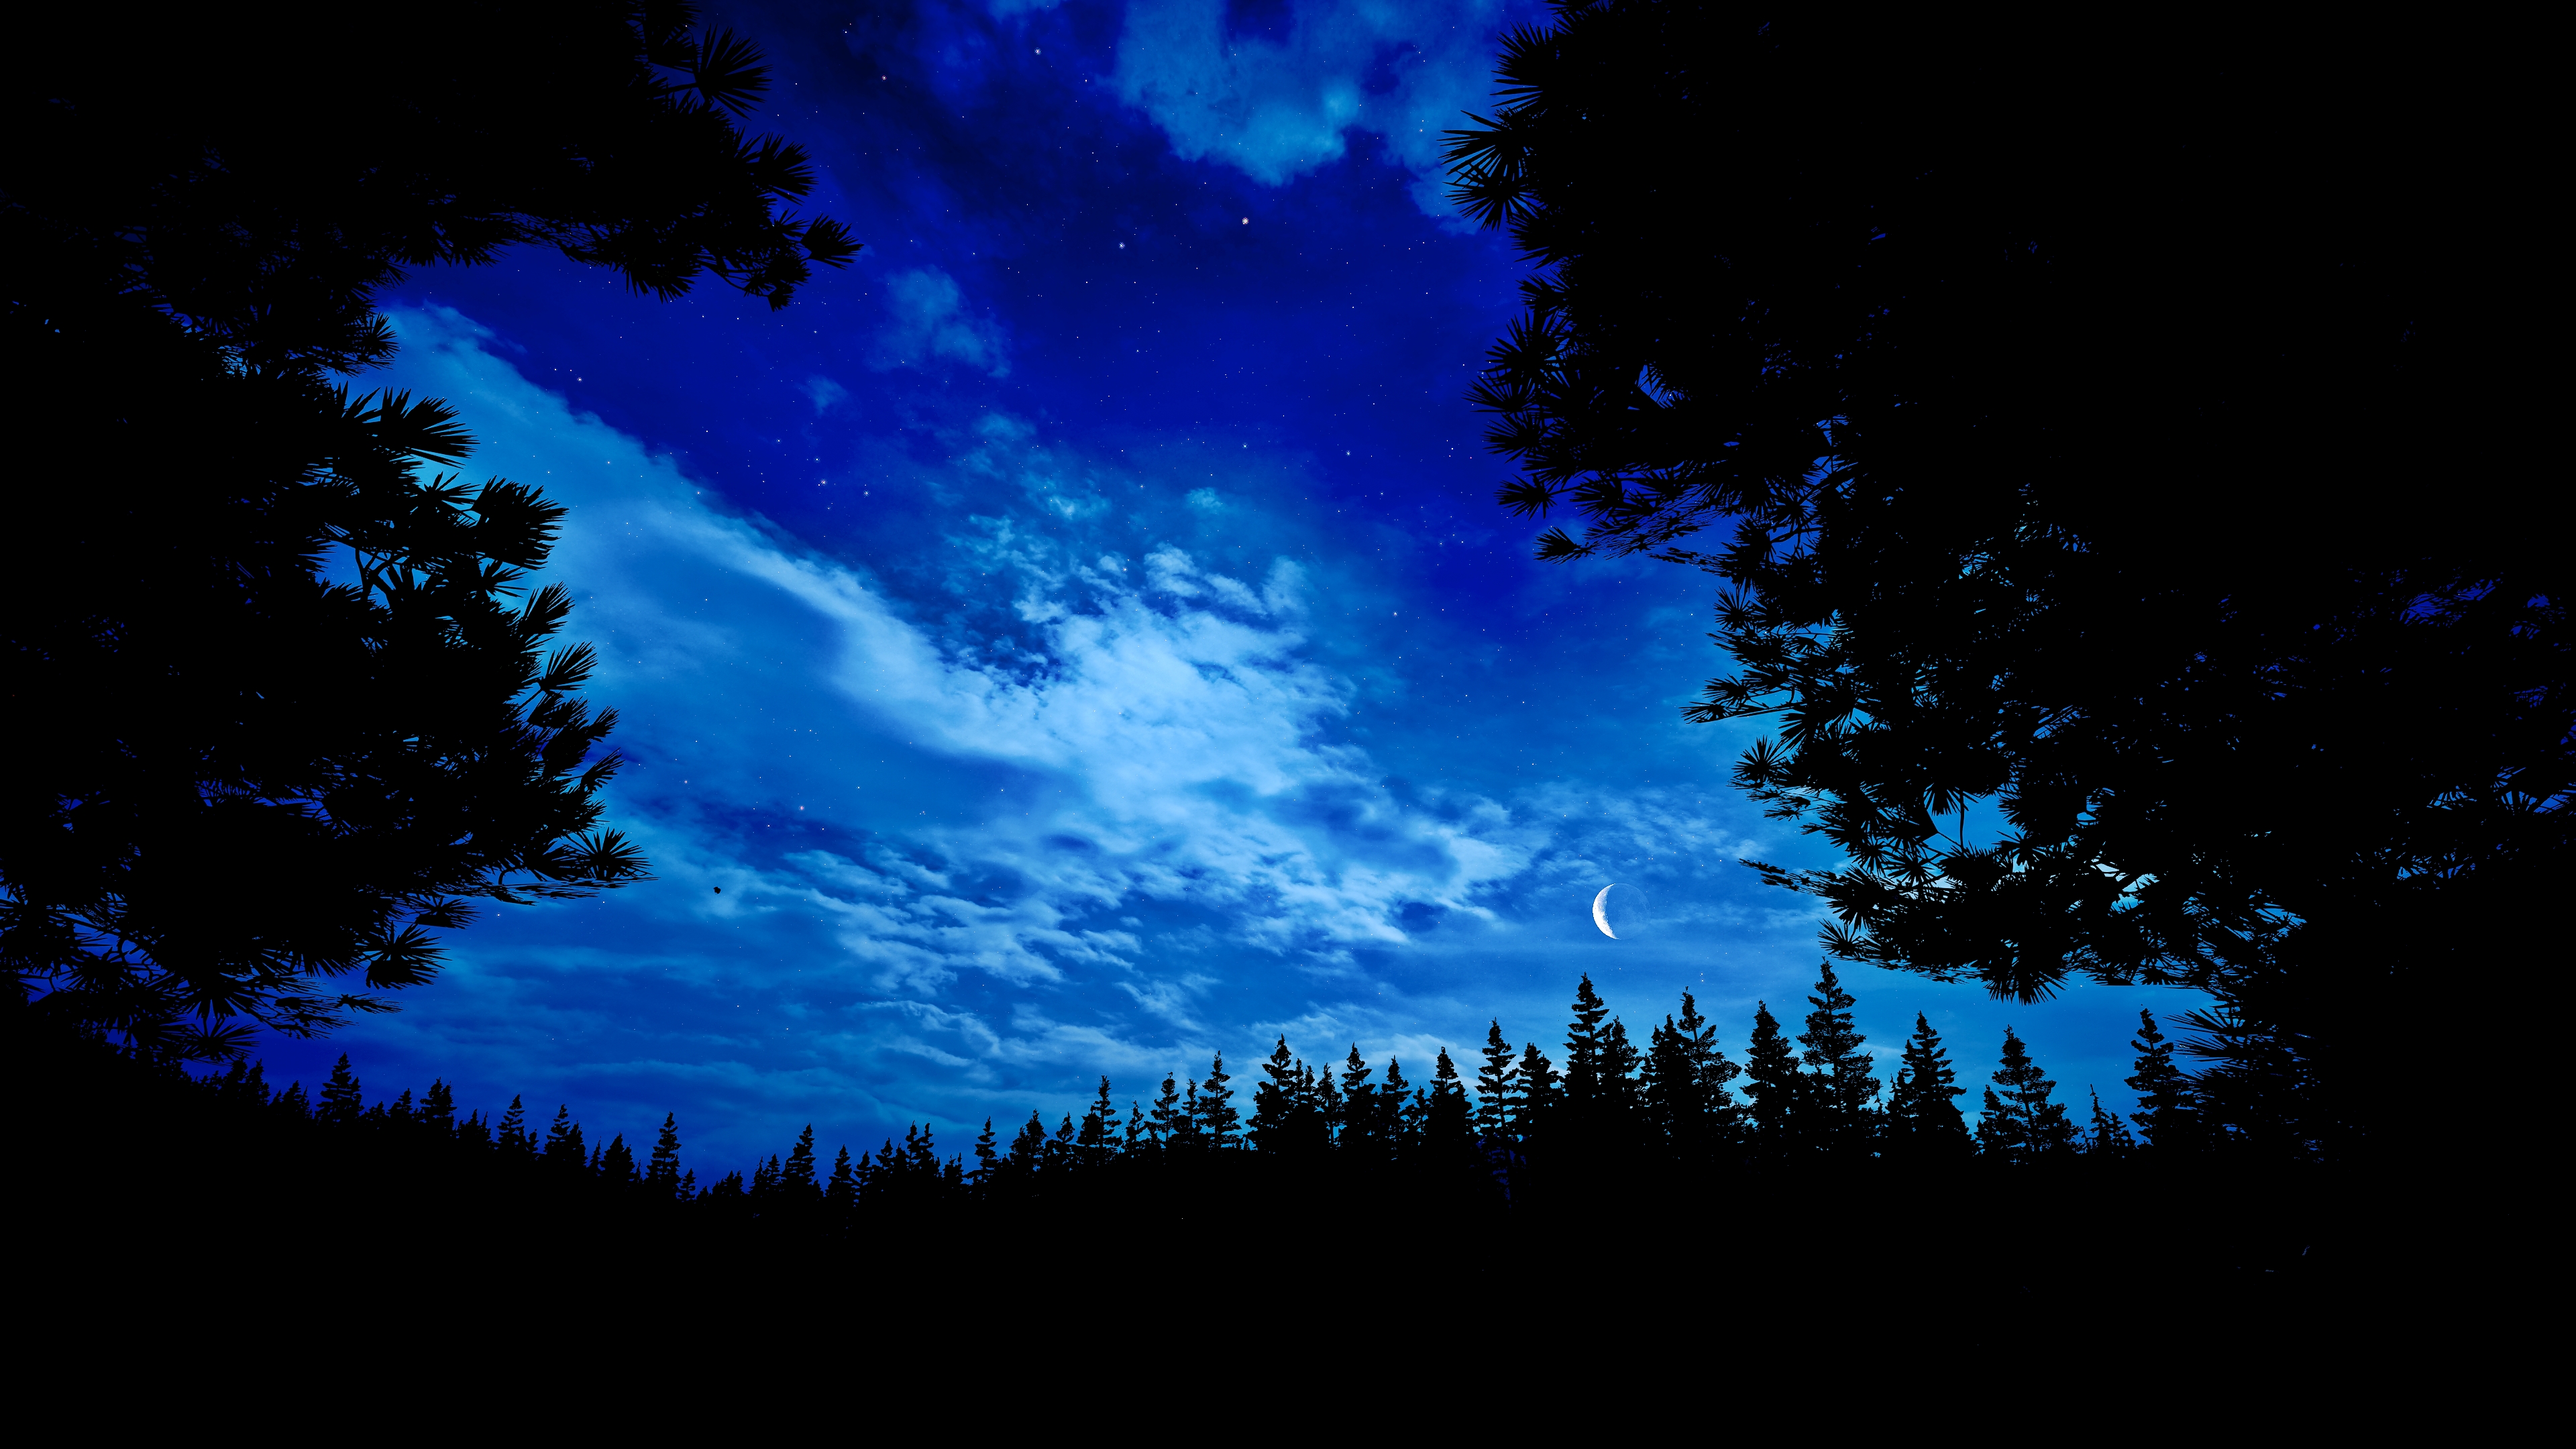 Far Cry 5 Night Full Moon Forest PC Gaming 3840x2160